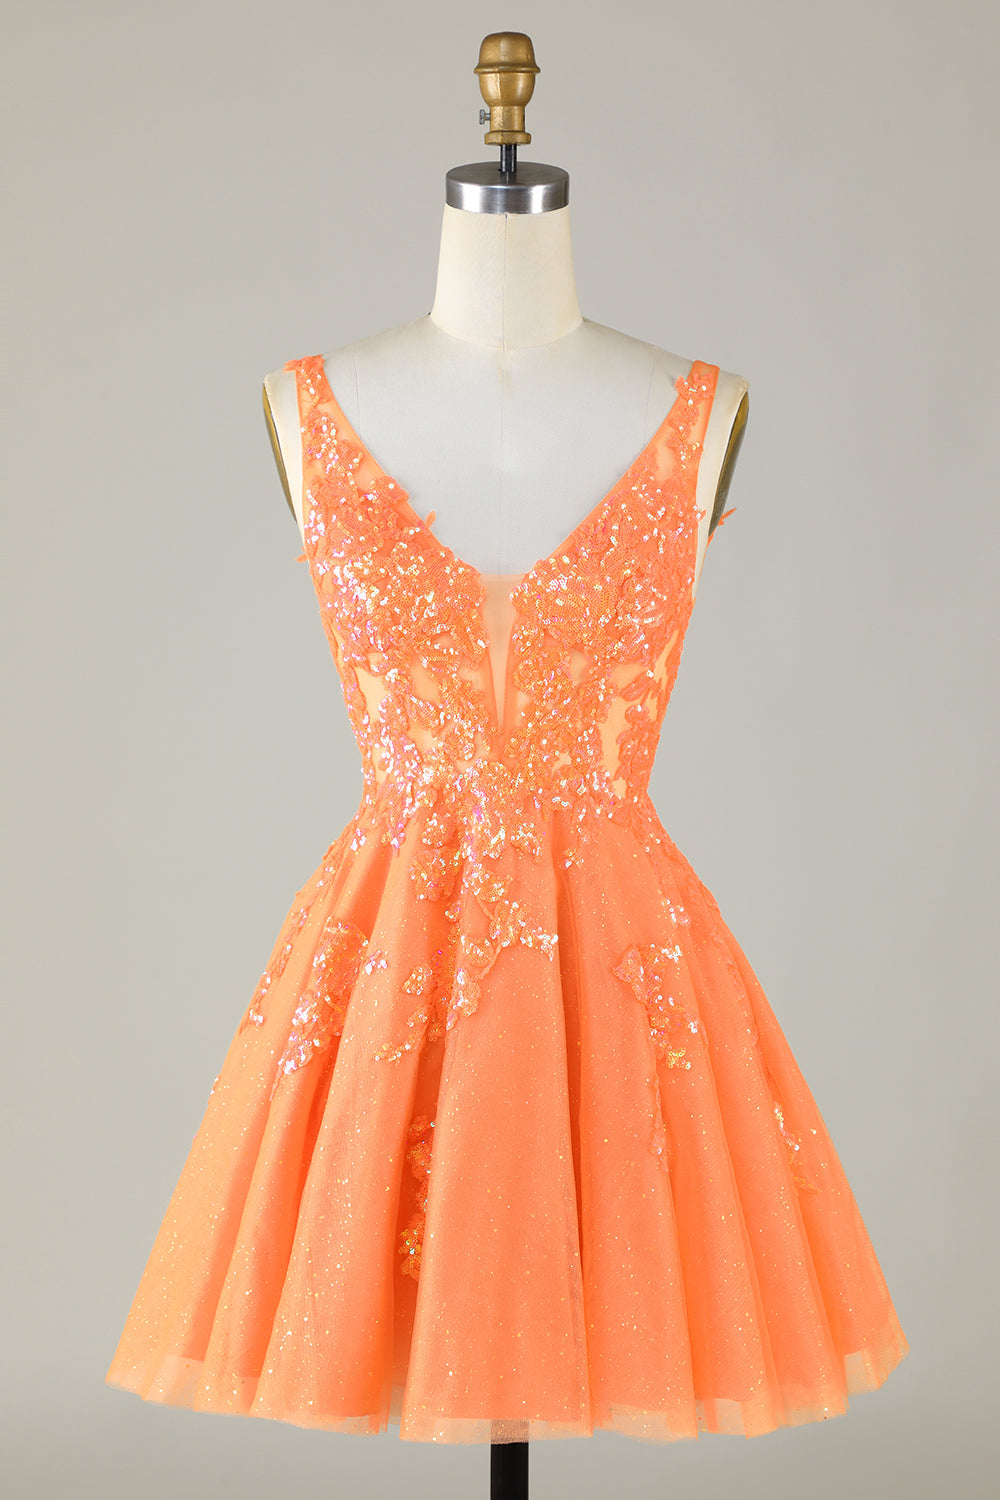 Hot Pink Cute Sparkly Homecoming Dress with Sequins Appliques